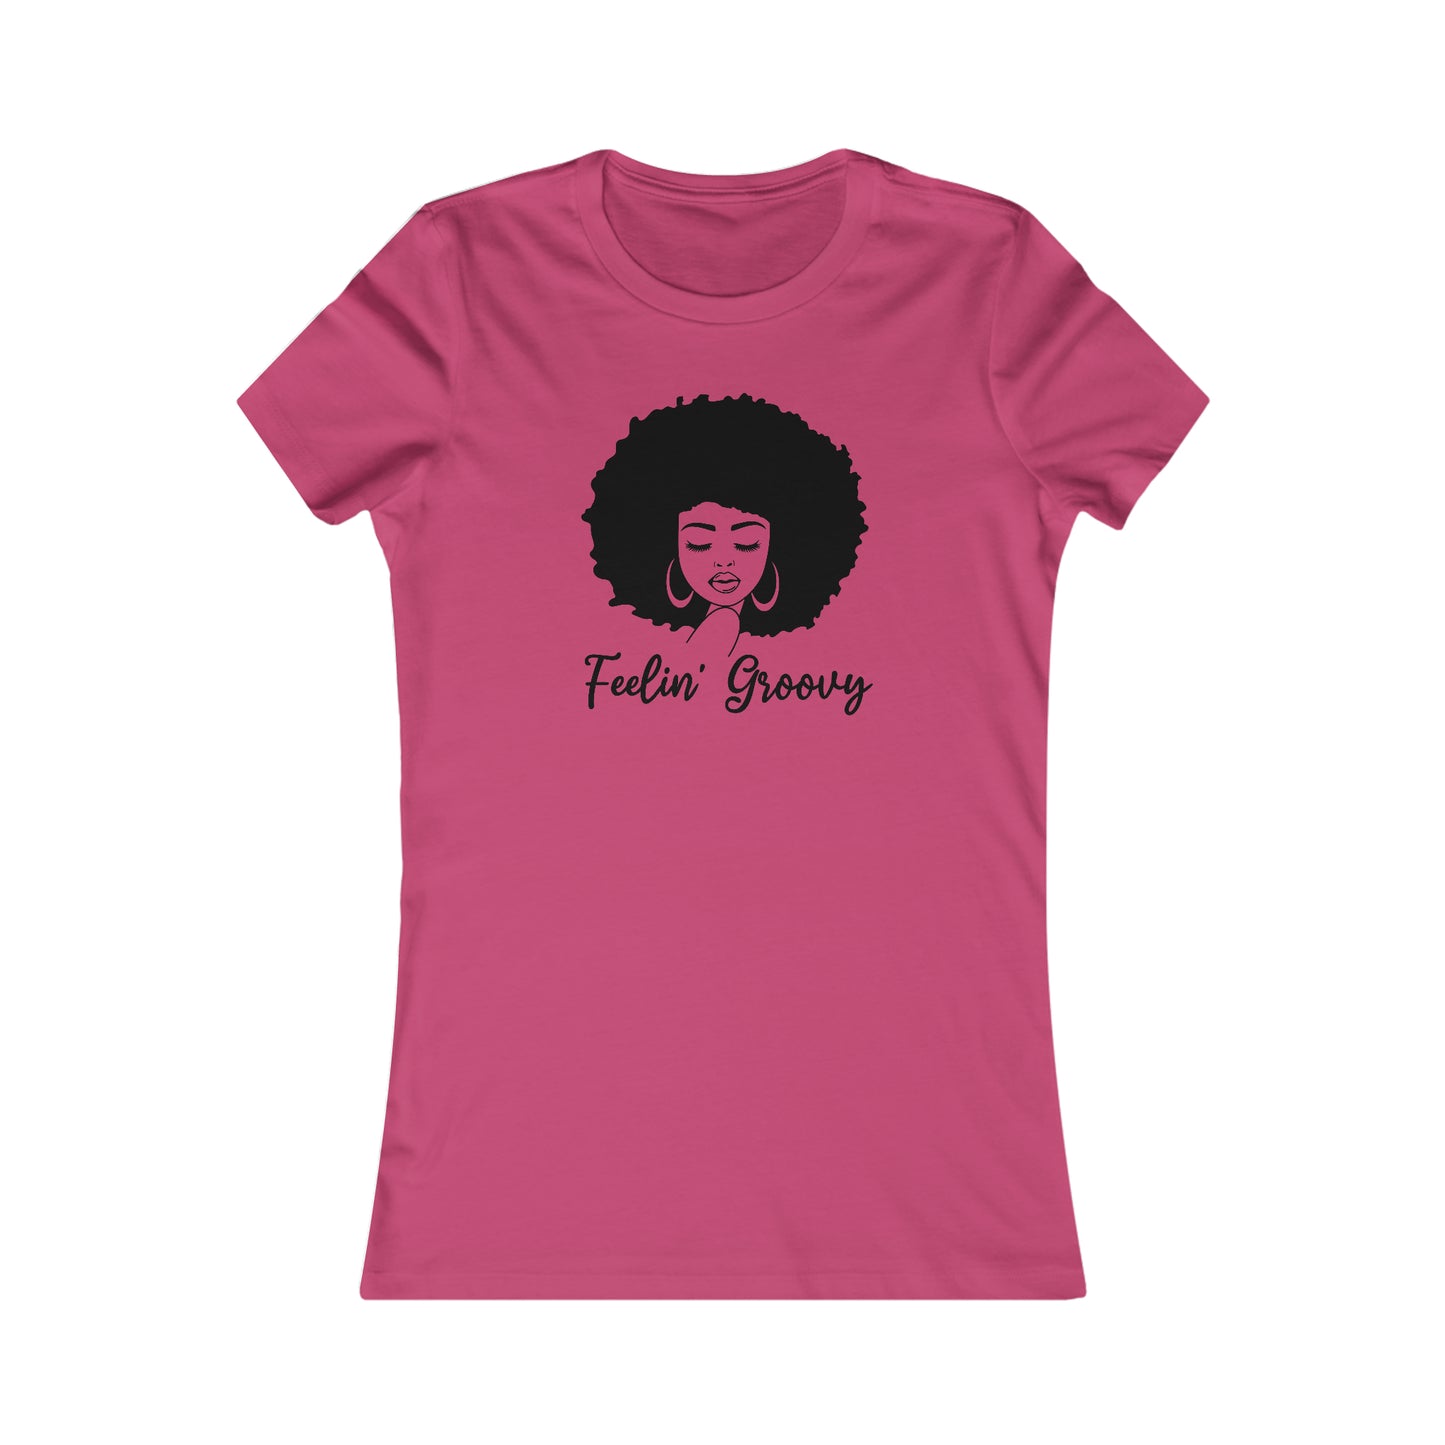 Groovy T-Shirt With Afro TShirt For Disco T Shirt For Seventies T-Shirt For Retro TShirt Groovy Retro Gift